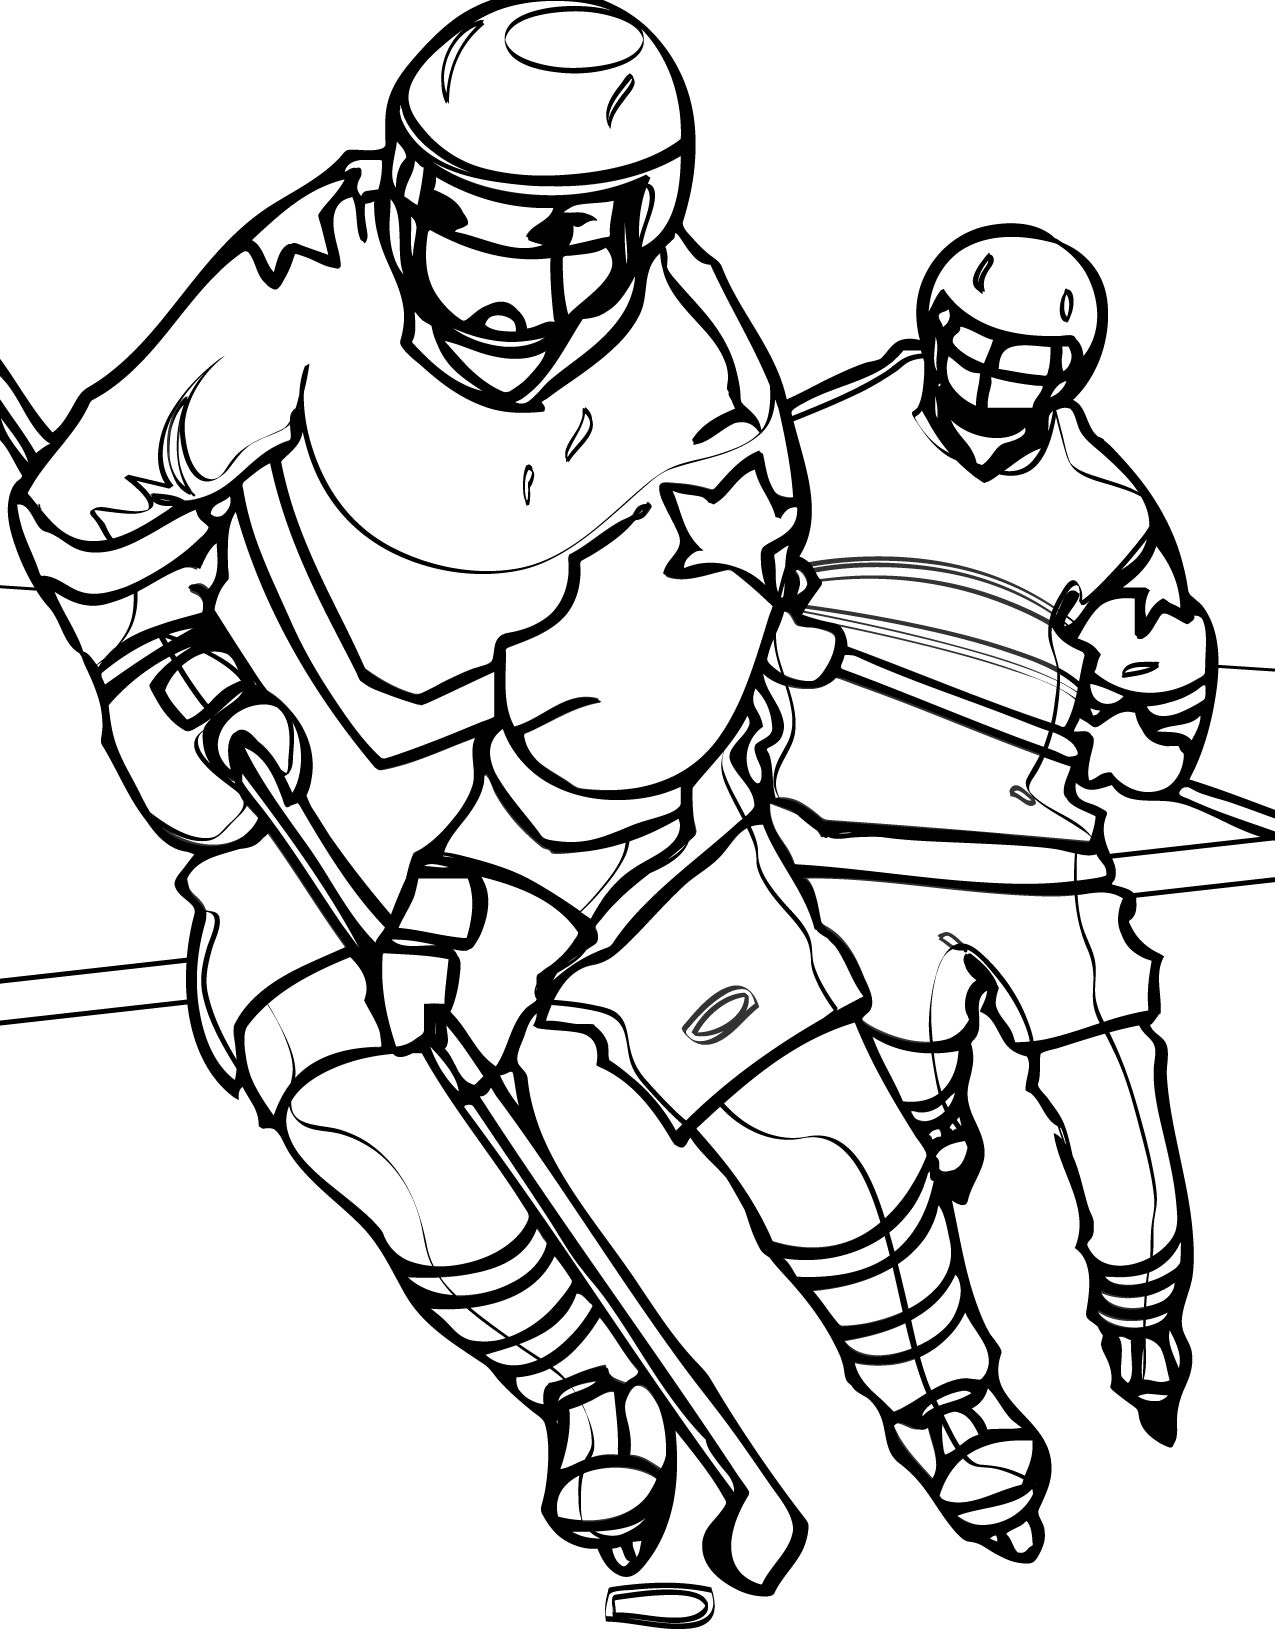 ice hockey coloring pages to print